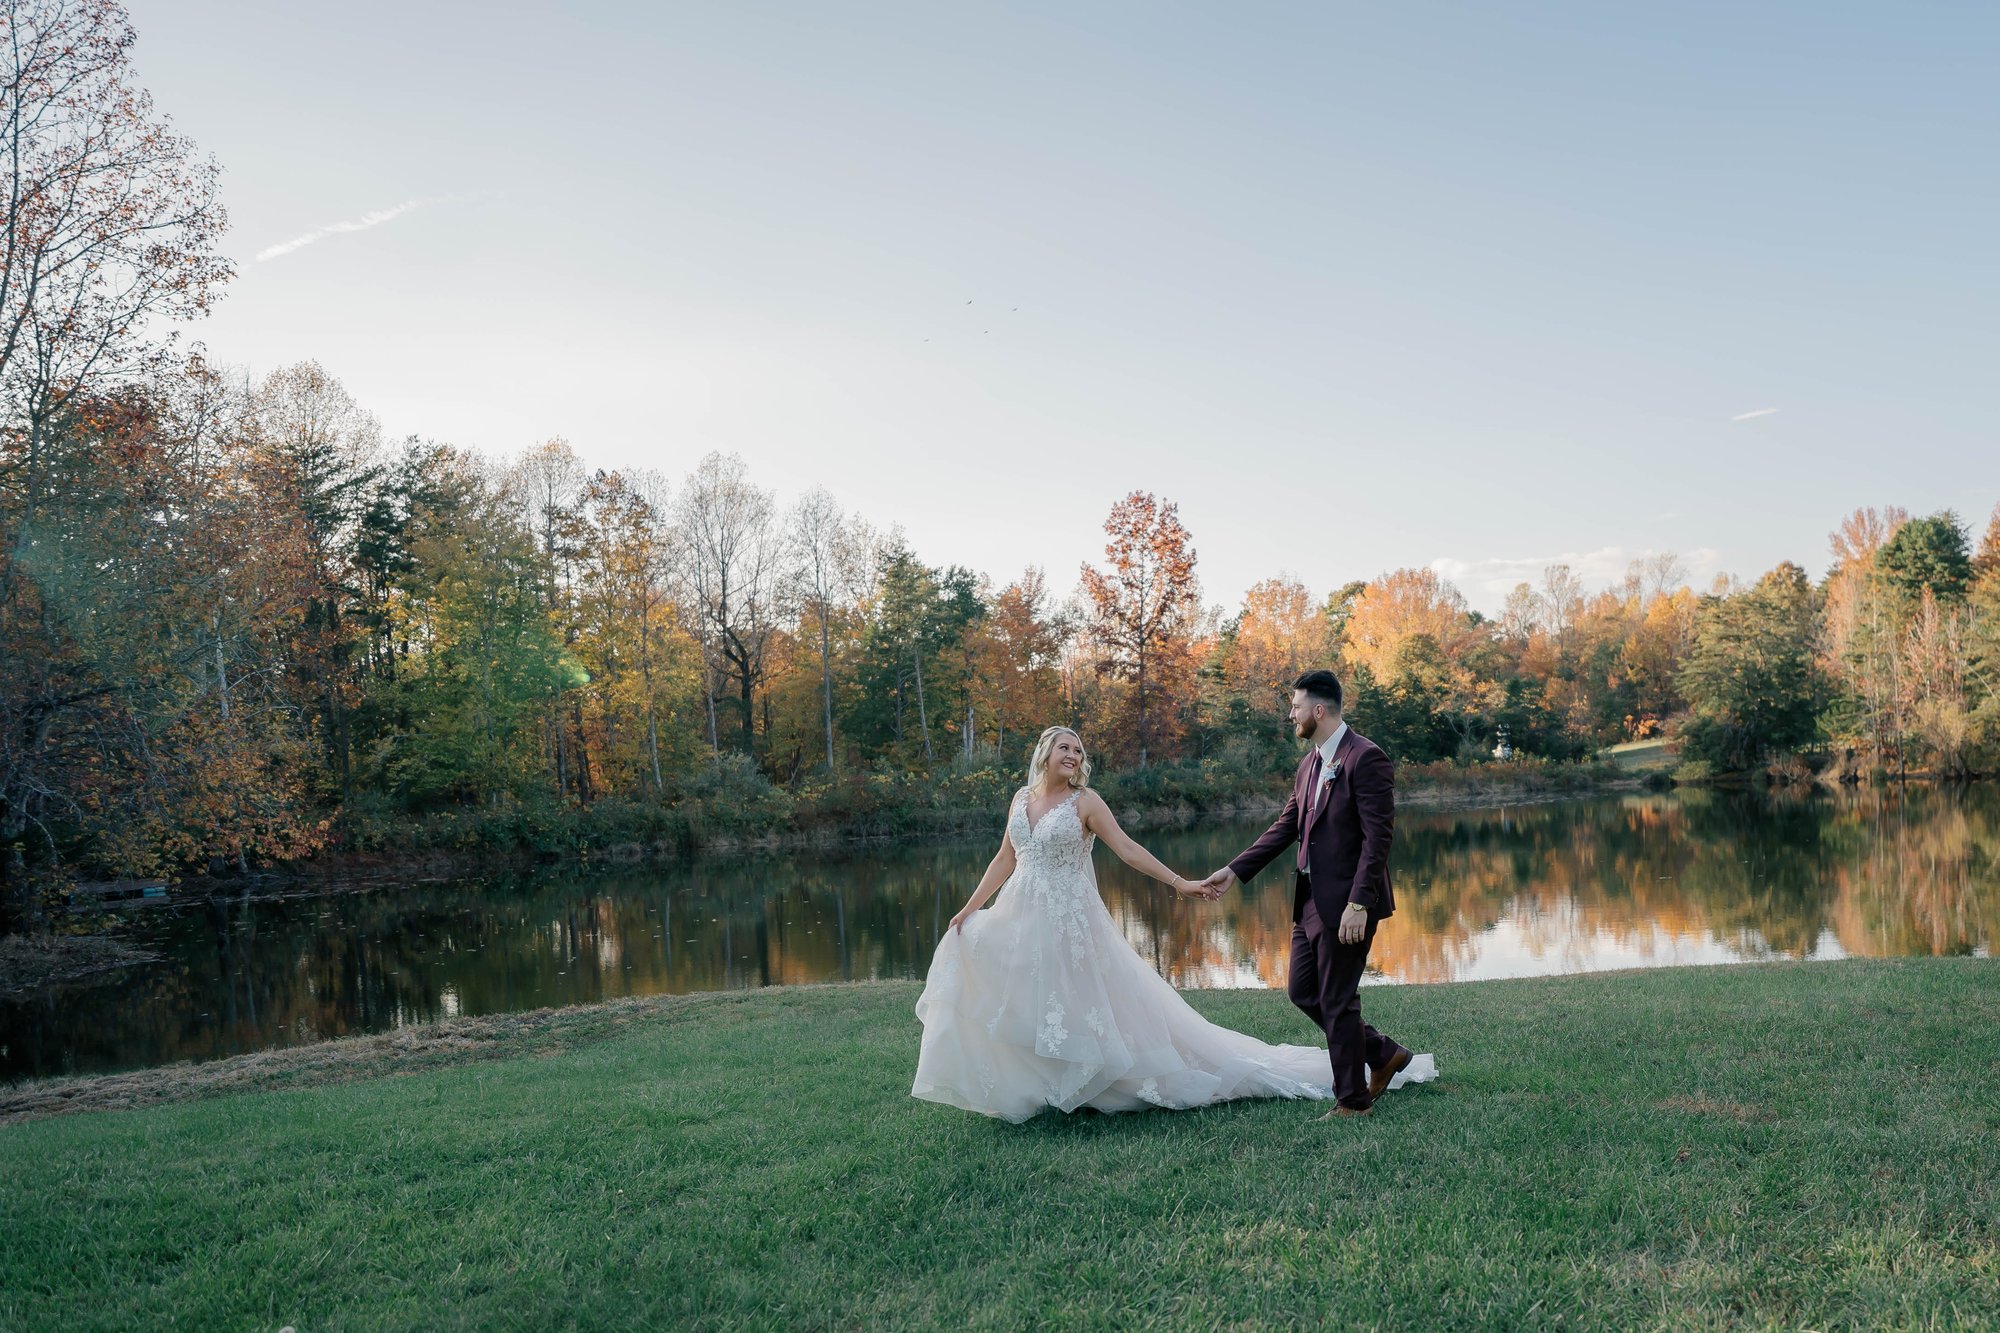 Wedding photo of a couple at Persimmon Creek Barn in Beaverdam, Virginia captured by Stephanie Grooms Artistry